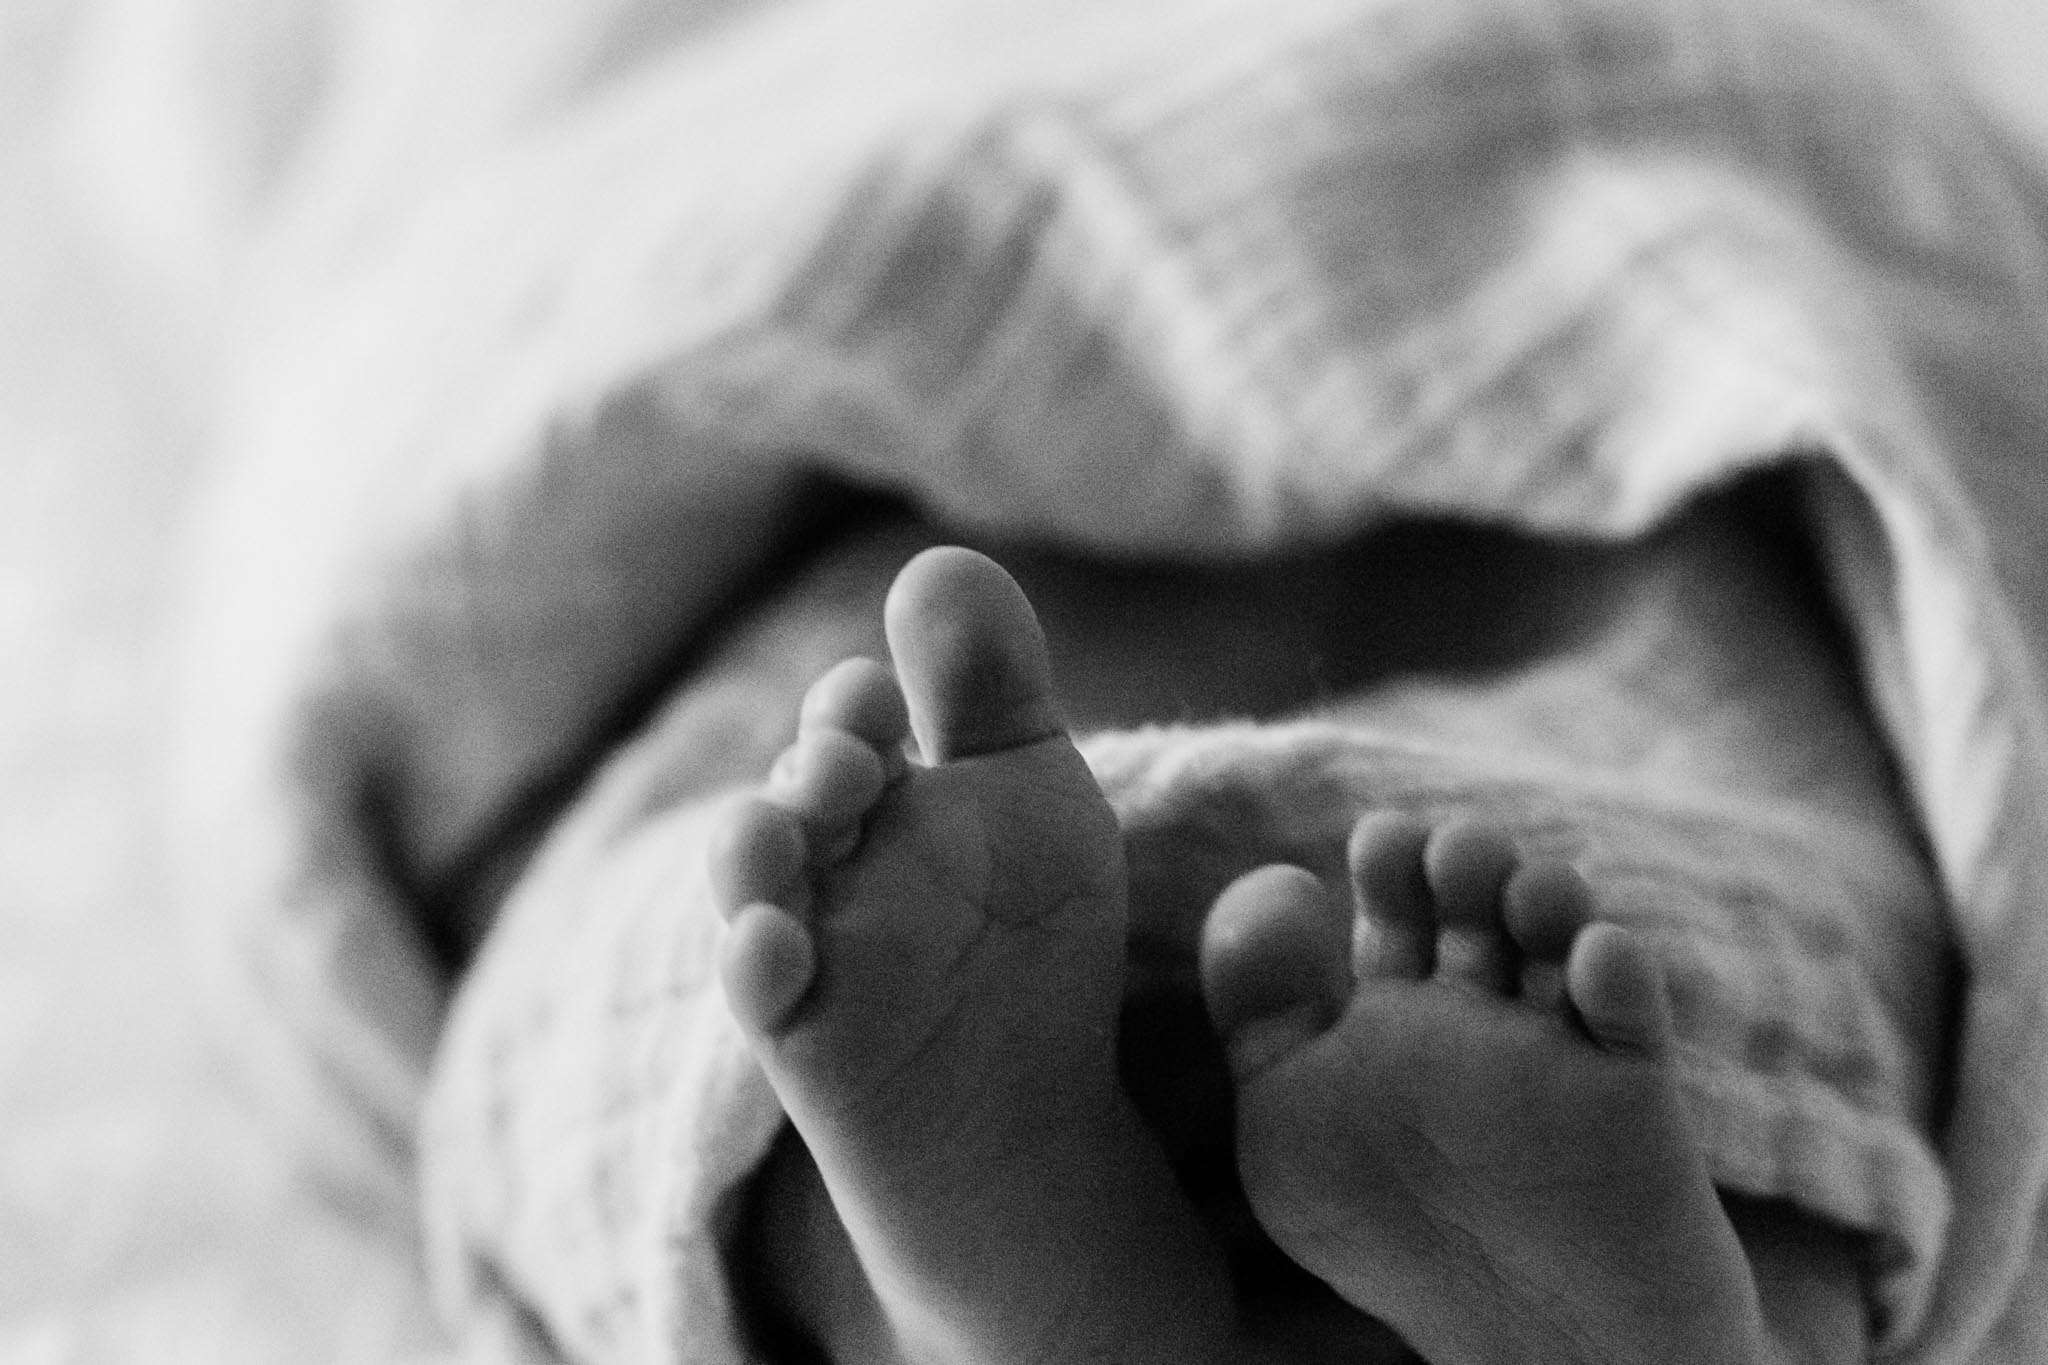 Raleigh Newborn Photographer | By G. Lin Photography | Black and white photo of baby's feet